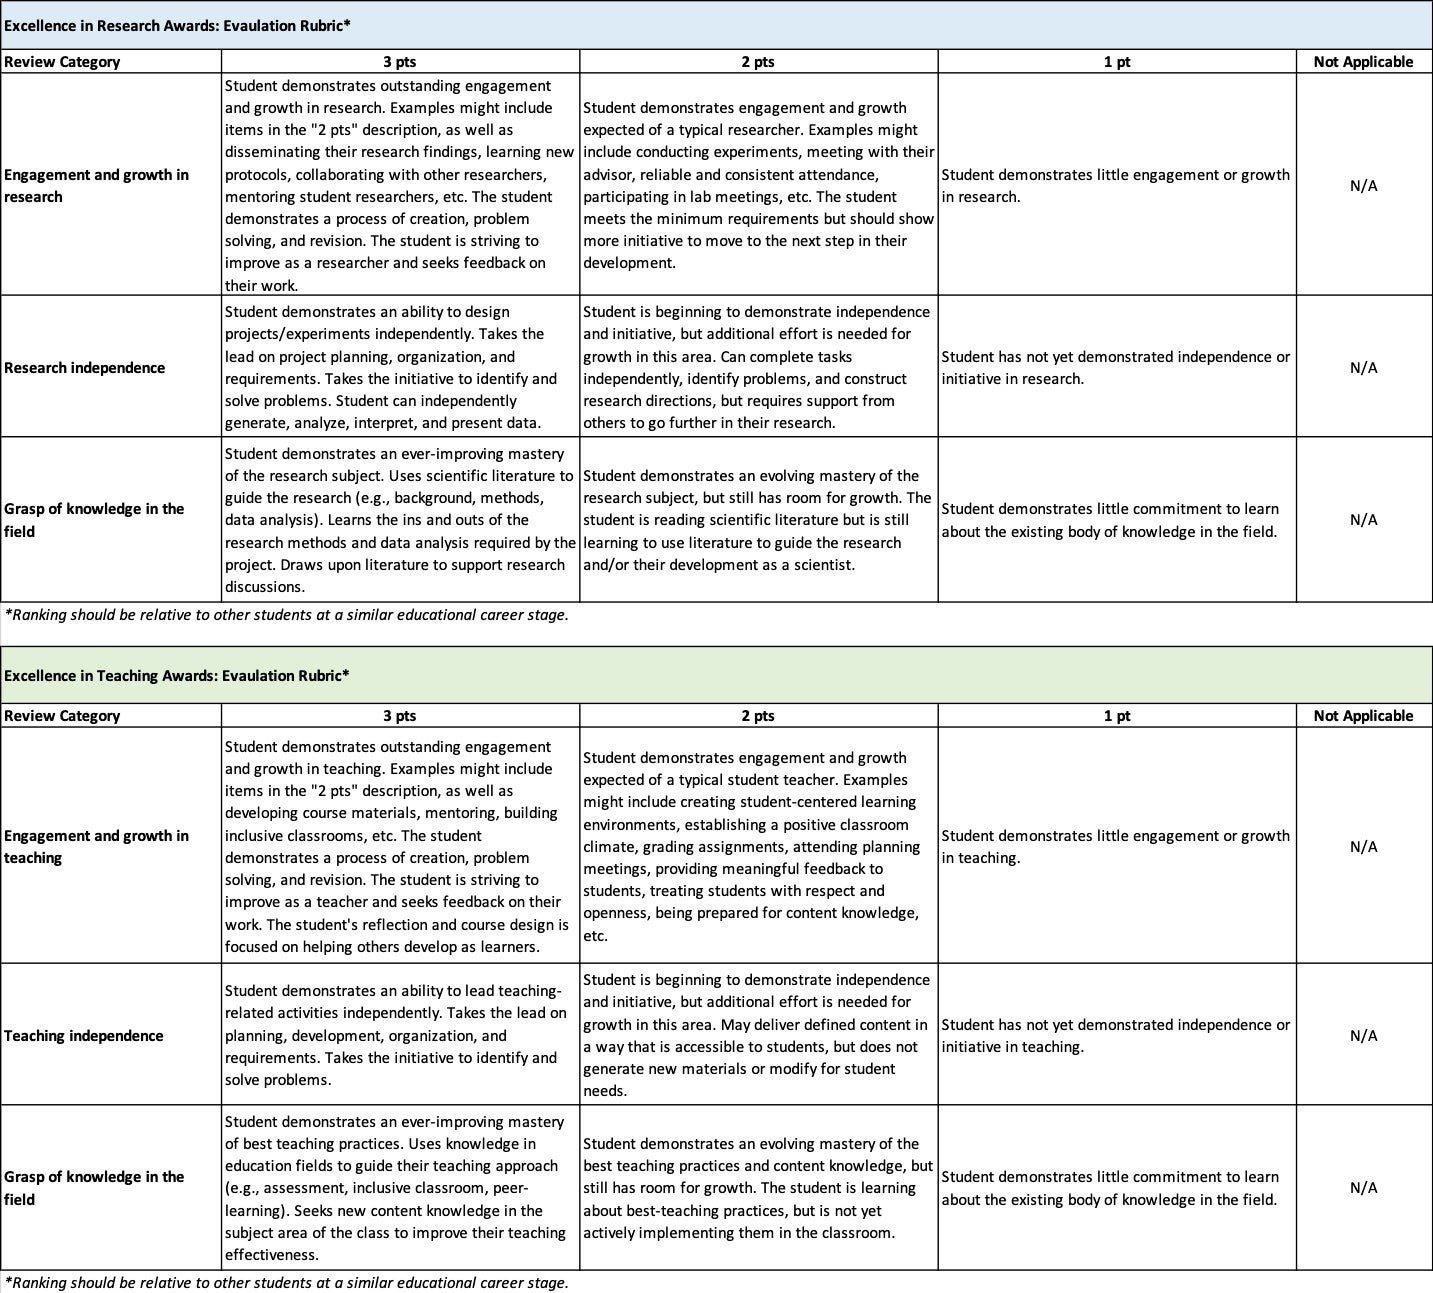 Student Excellence Awards Evaluation Rubrics